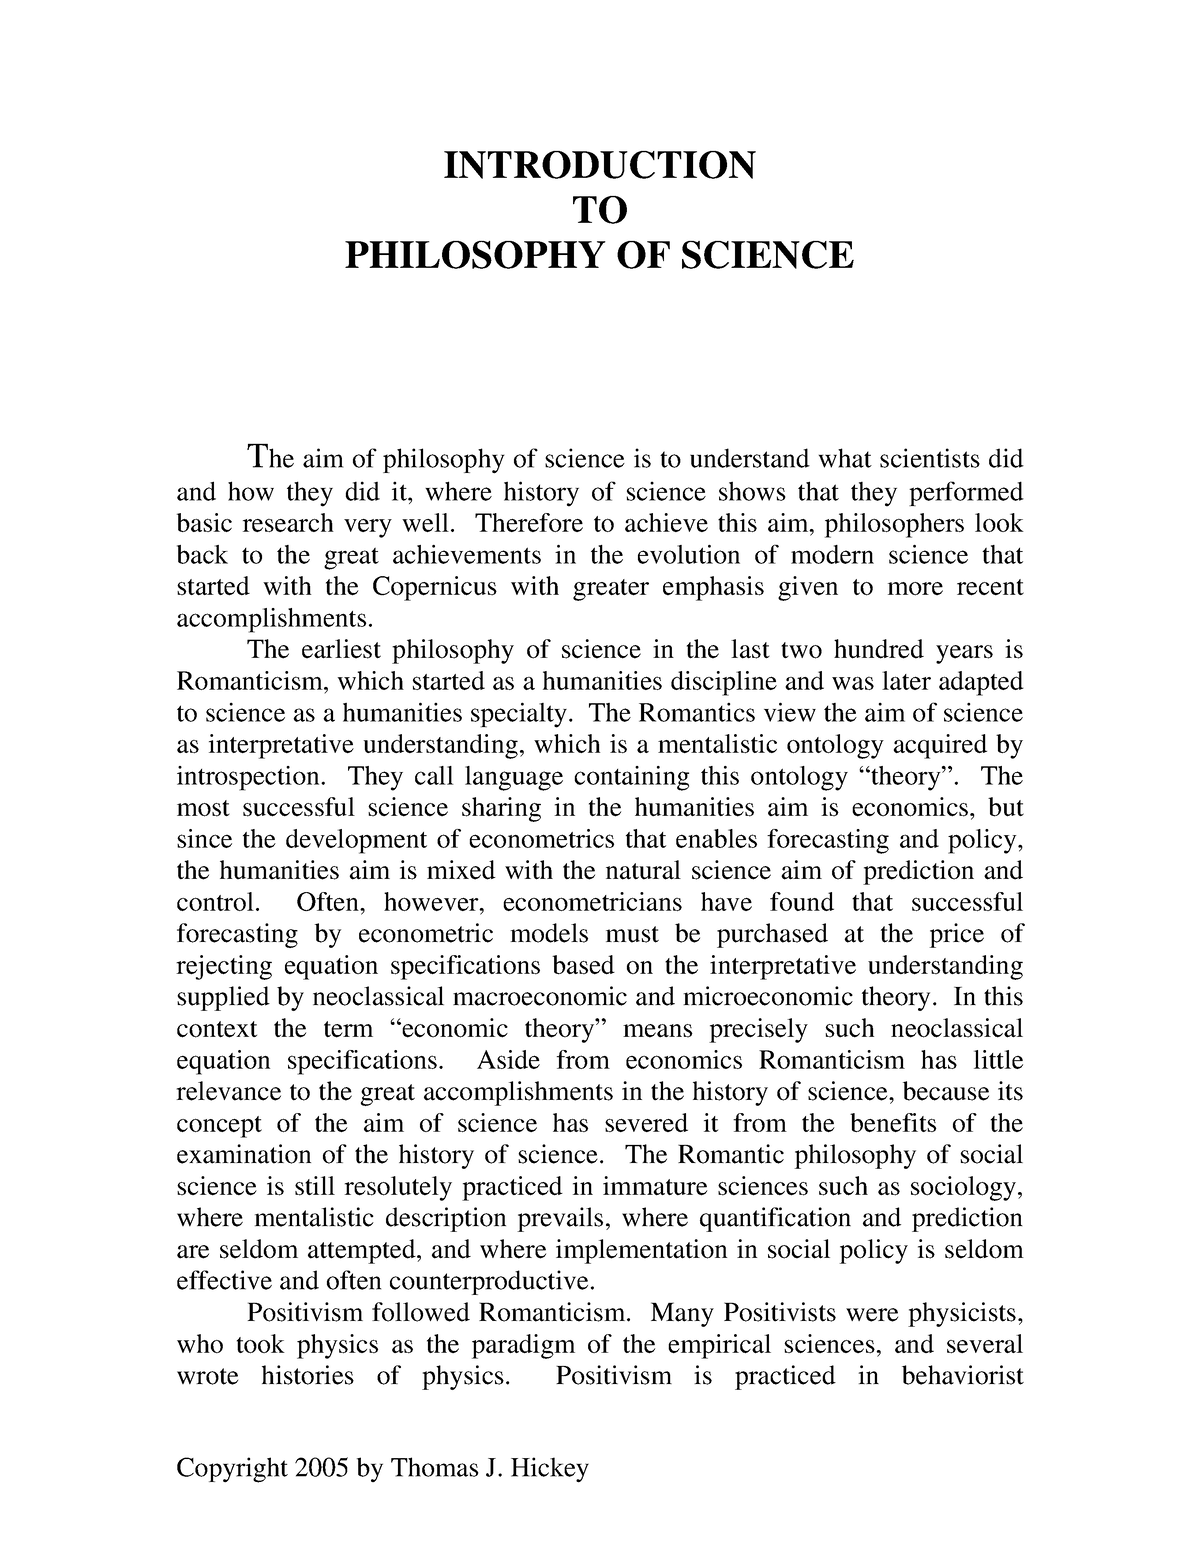 philosophy of science essay writing